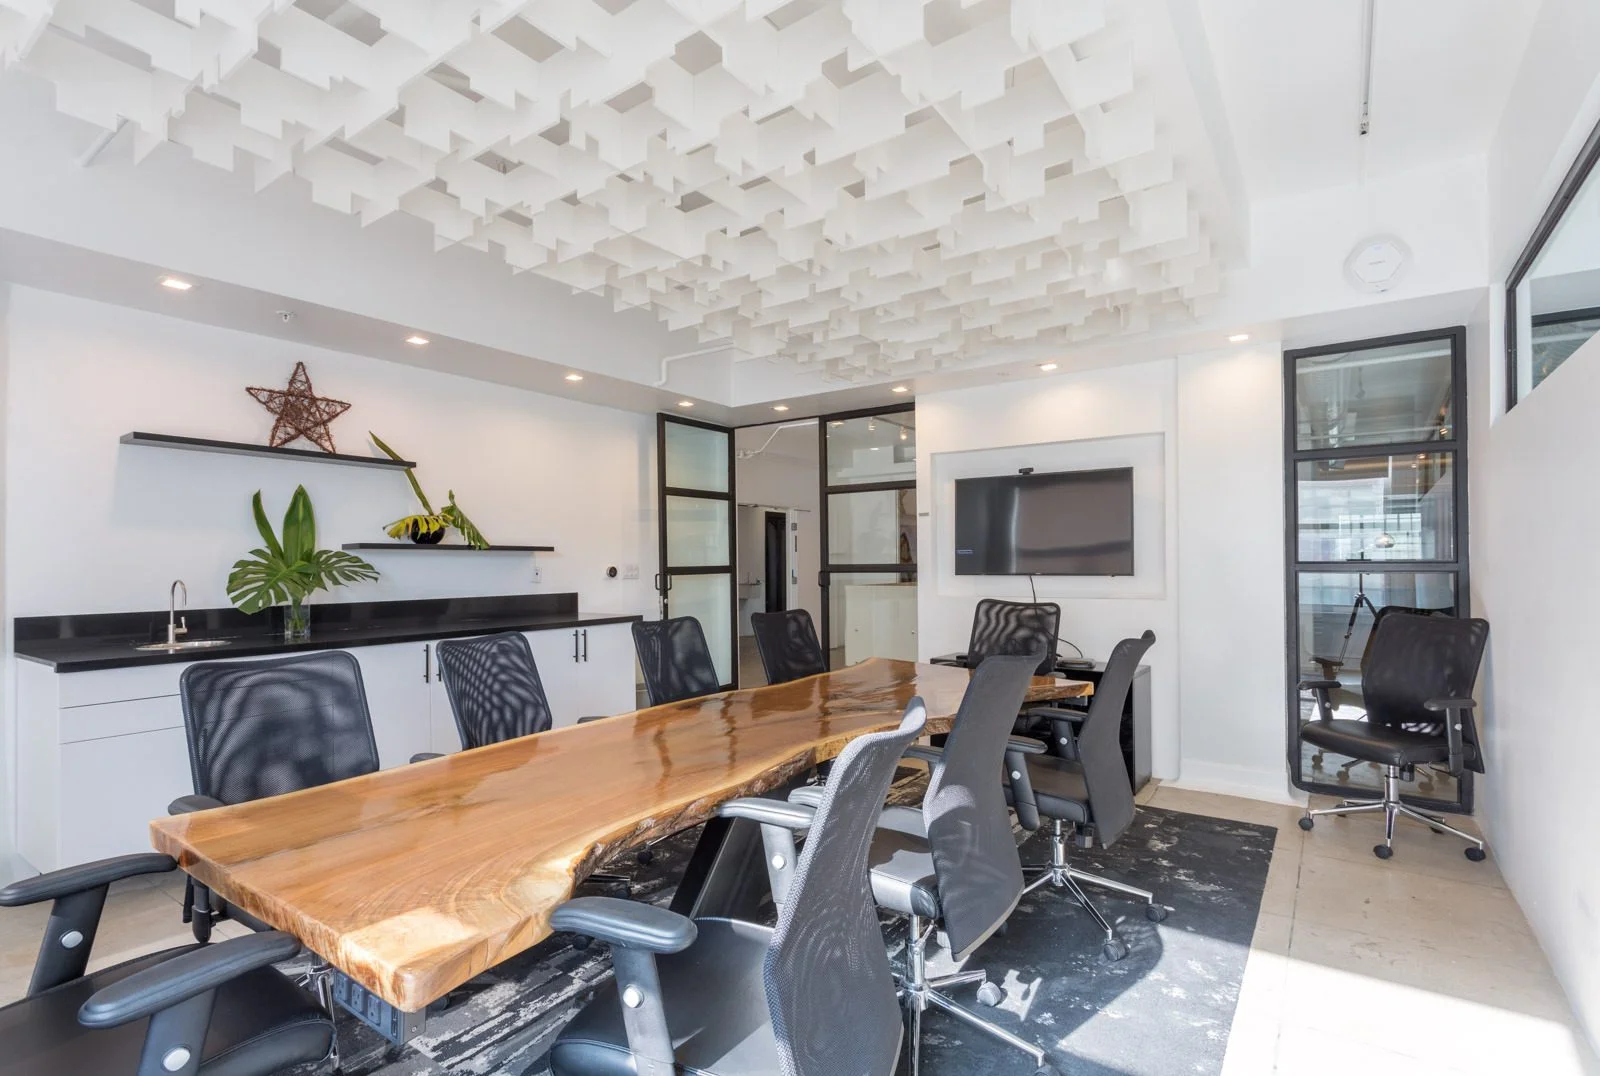 Reserve Boardroom for Rent with Modern Design Audio-Visual Technology and Comfortable Seating.